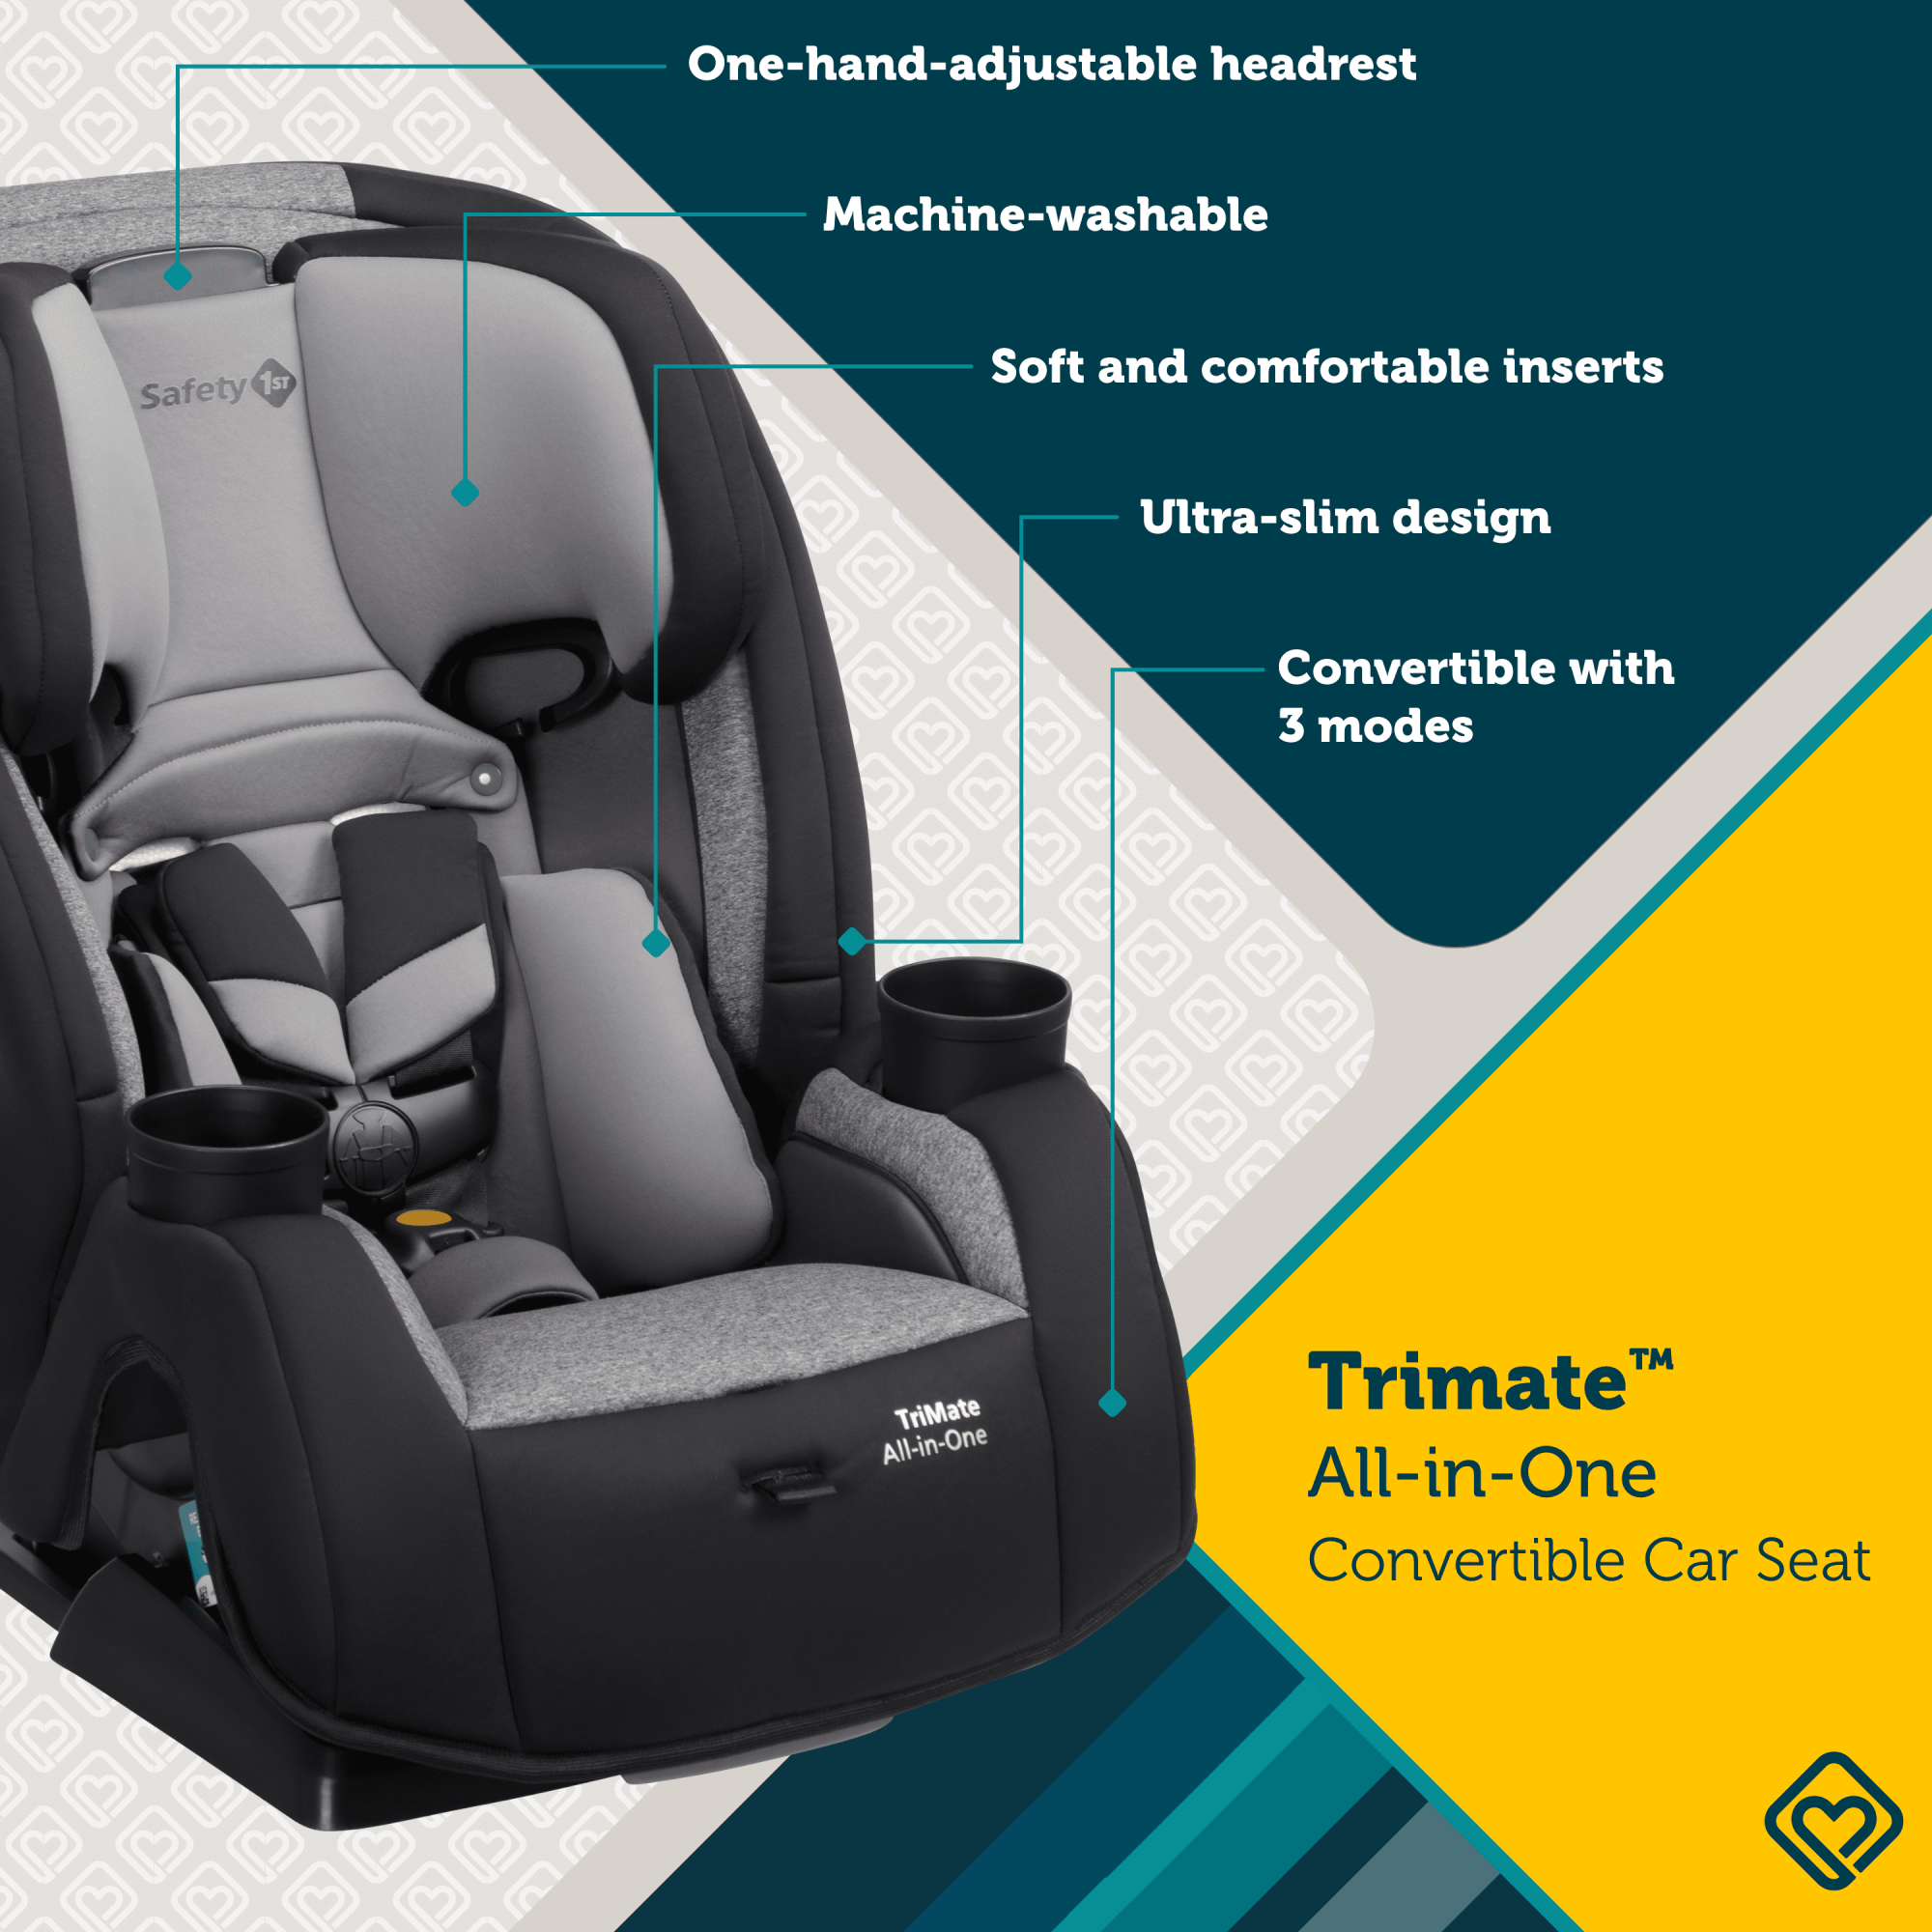 TriMate™ All-in-One Convertible Car Seat - one-hand-adjustable headrest, machine-washable, soft and comfortable inserts, ultra-slim design, convertible with 3 modes